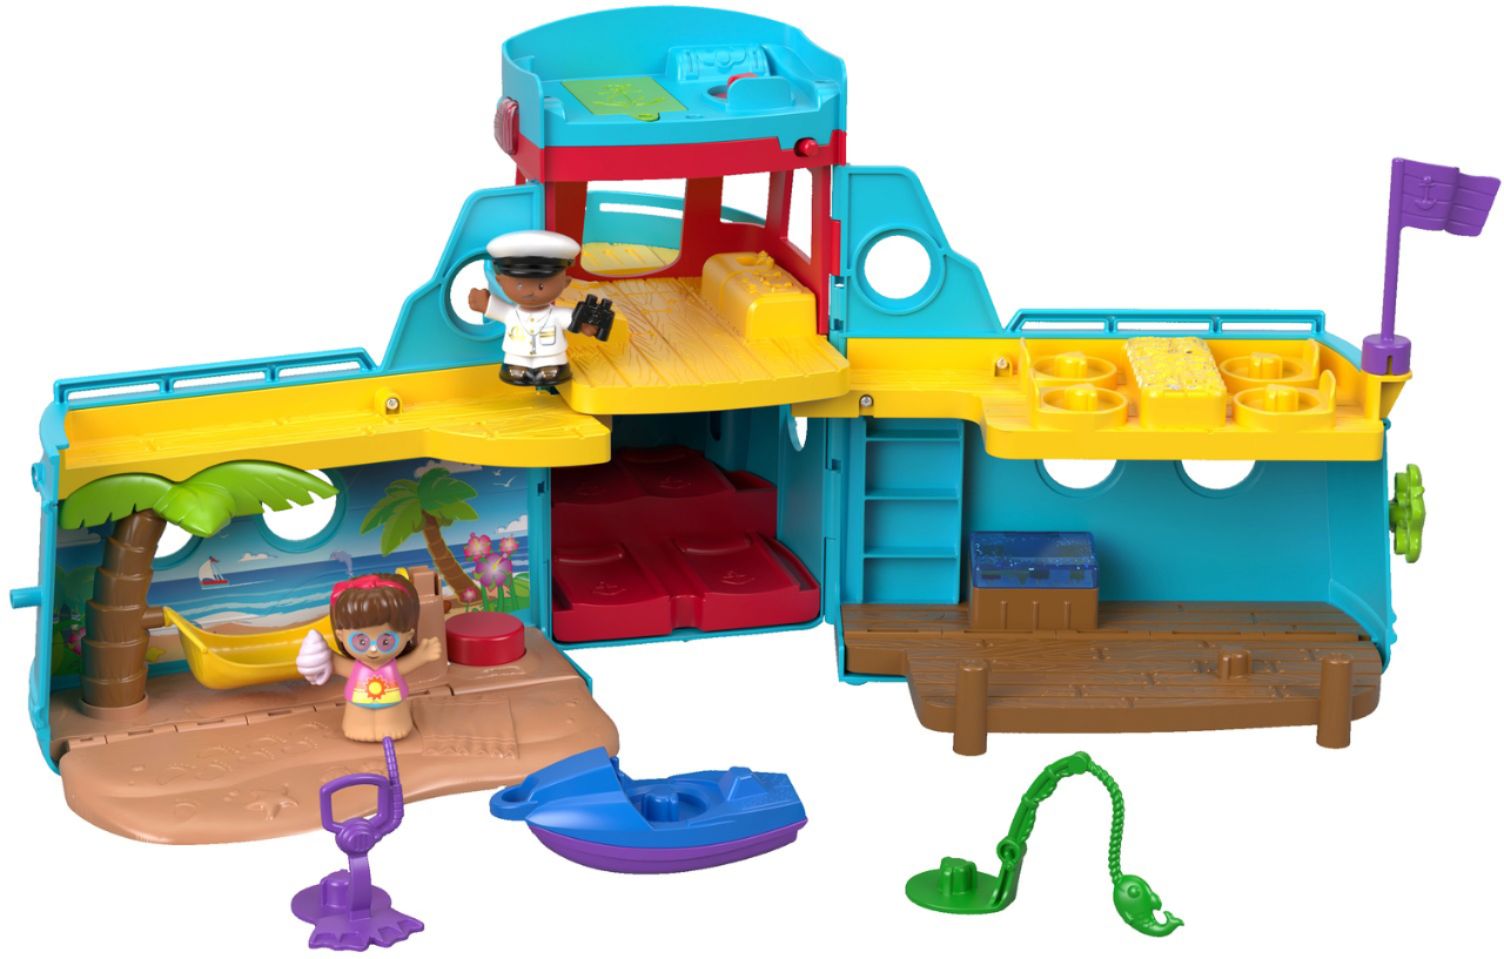 ... Fisher-Price Travel Together Friend Ship Toddler Activity Toy with Figures 